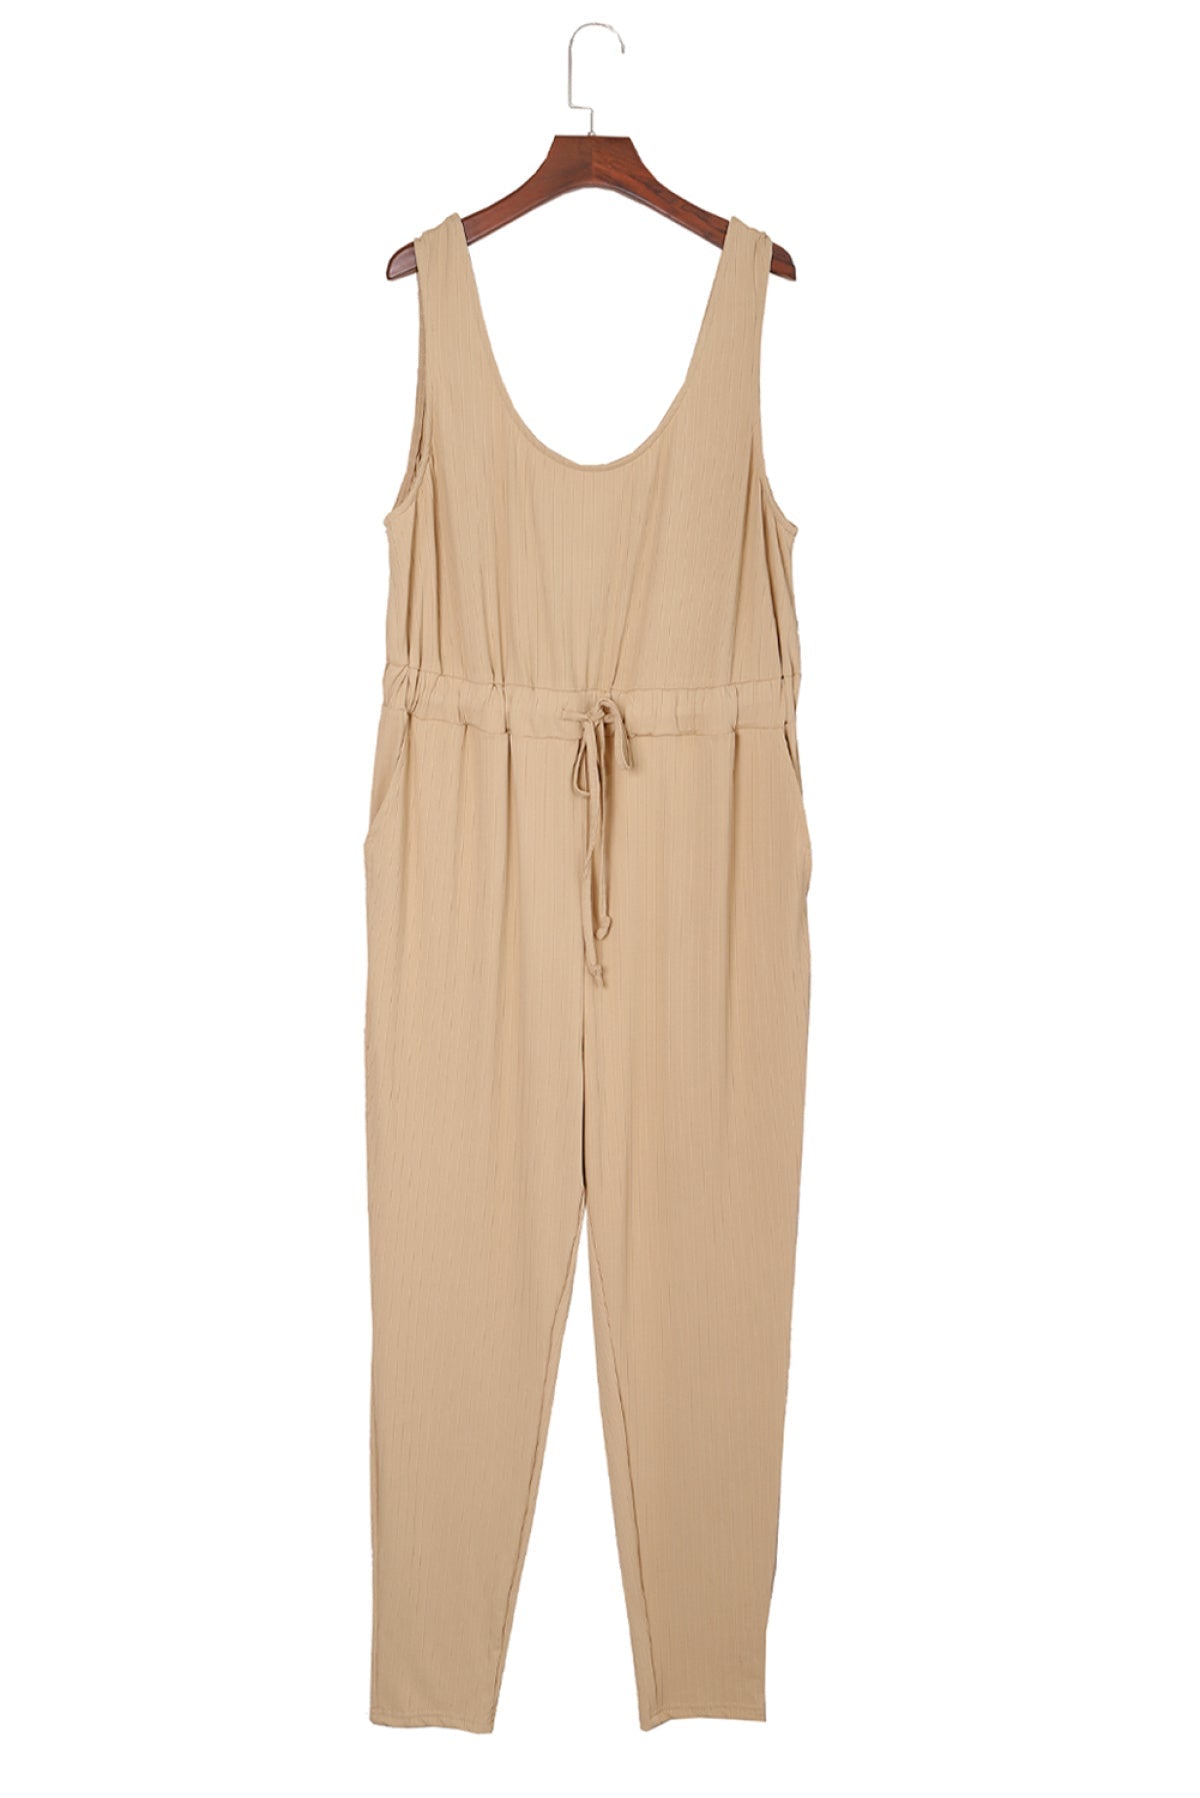 Apricot Ribbed Drawstring Waist Plus Size Sleeveless Jumpsuit | Art in Aging